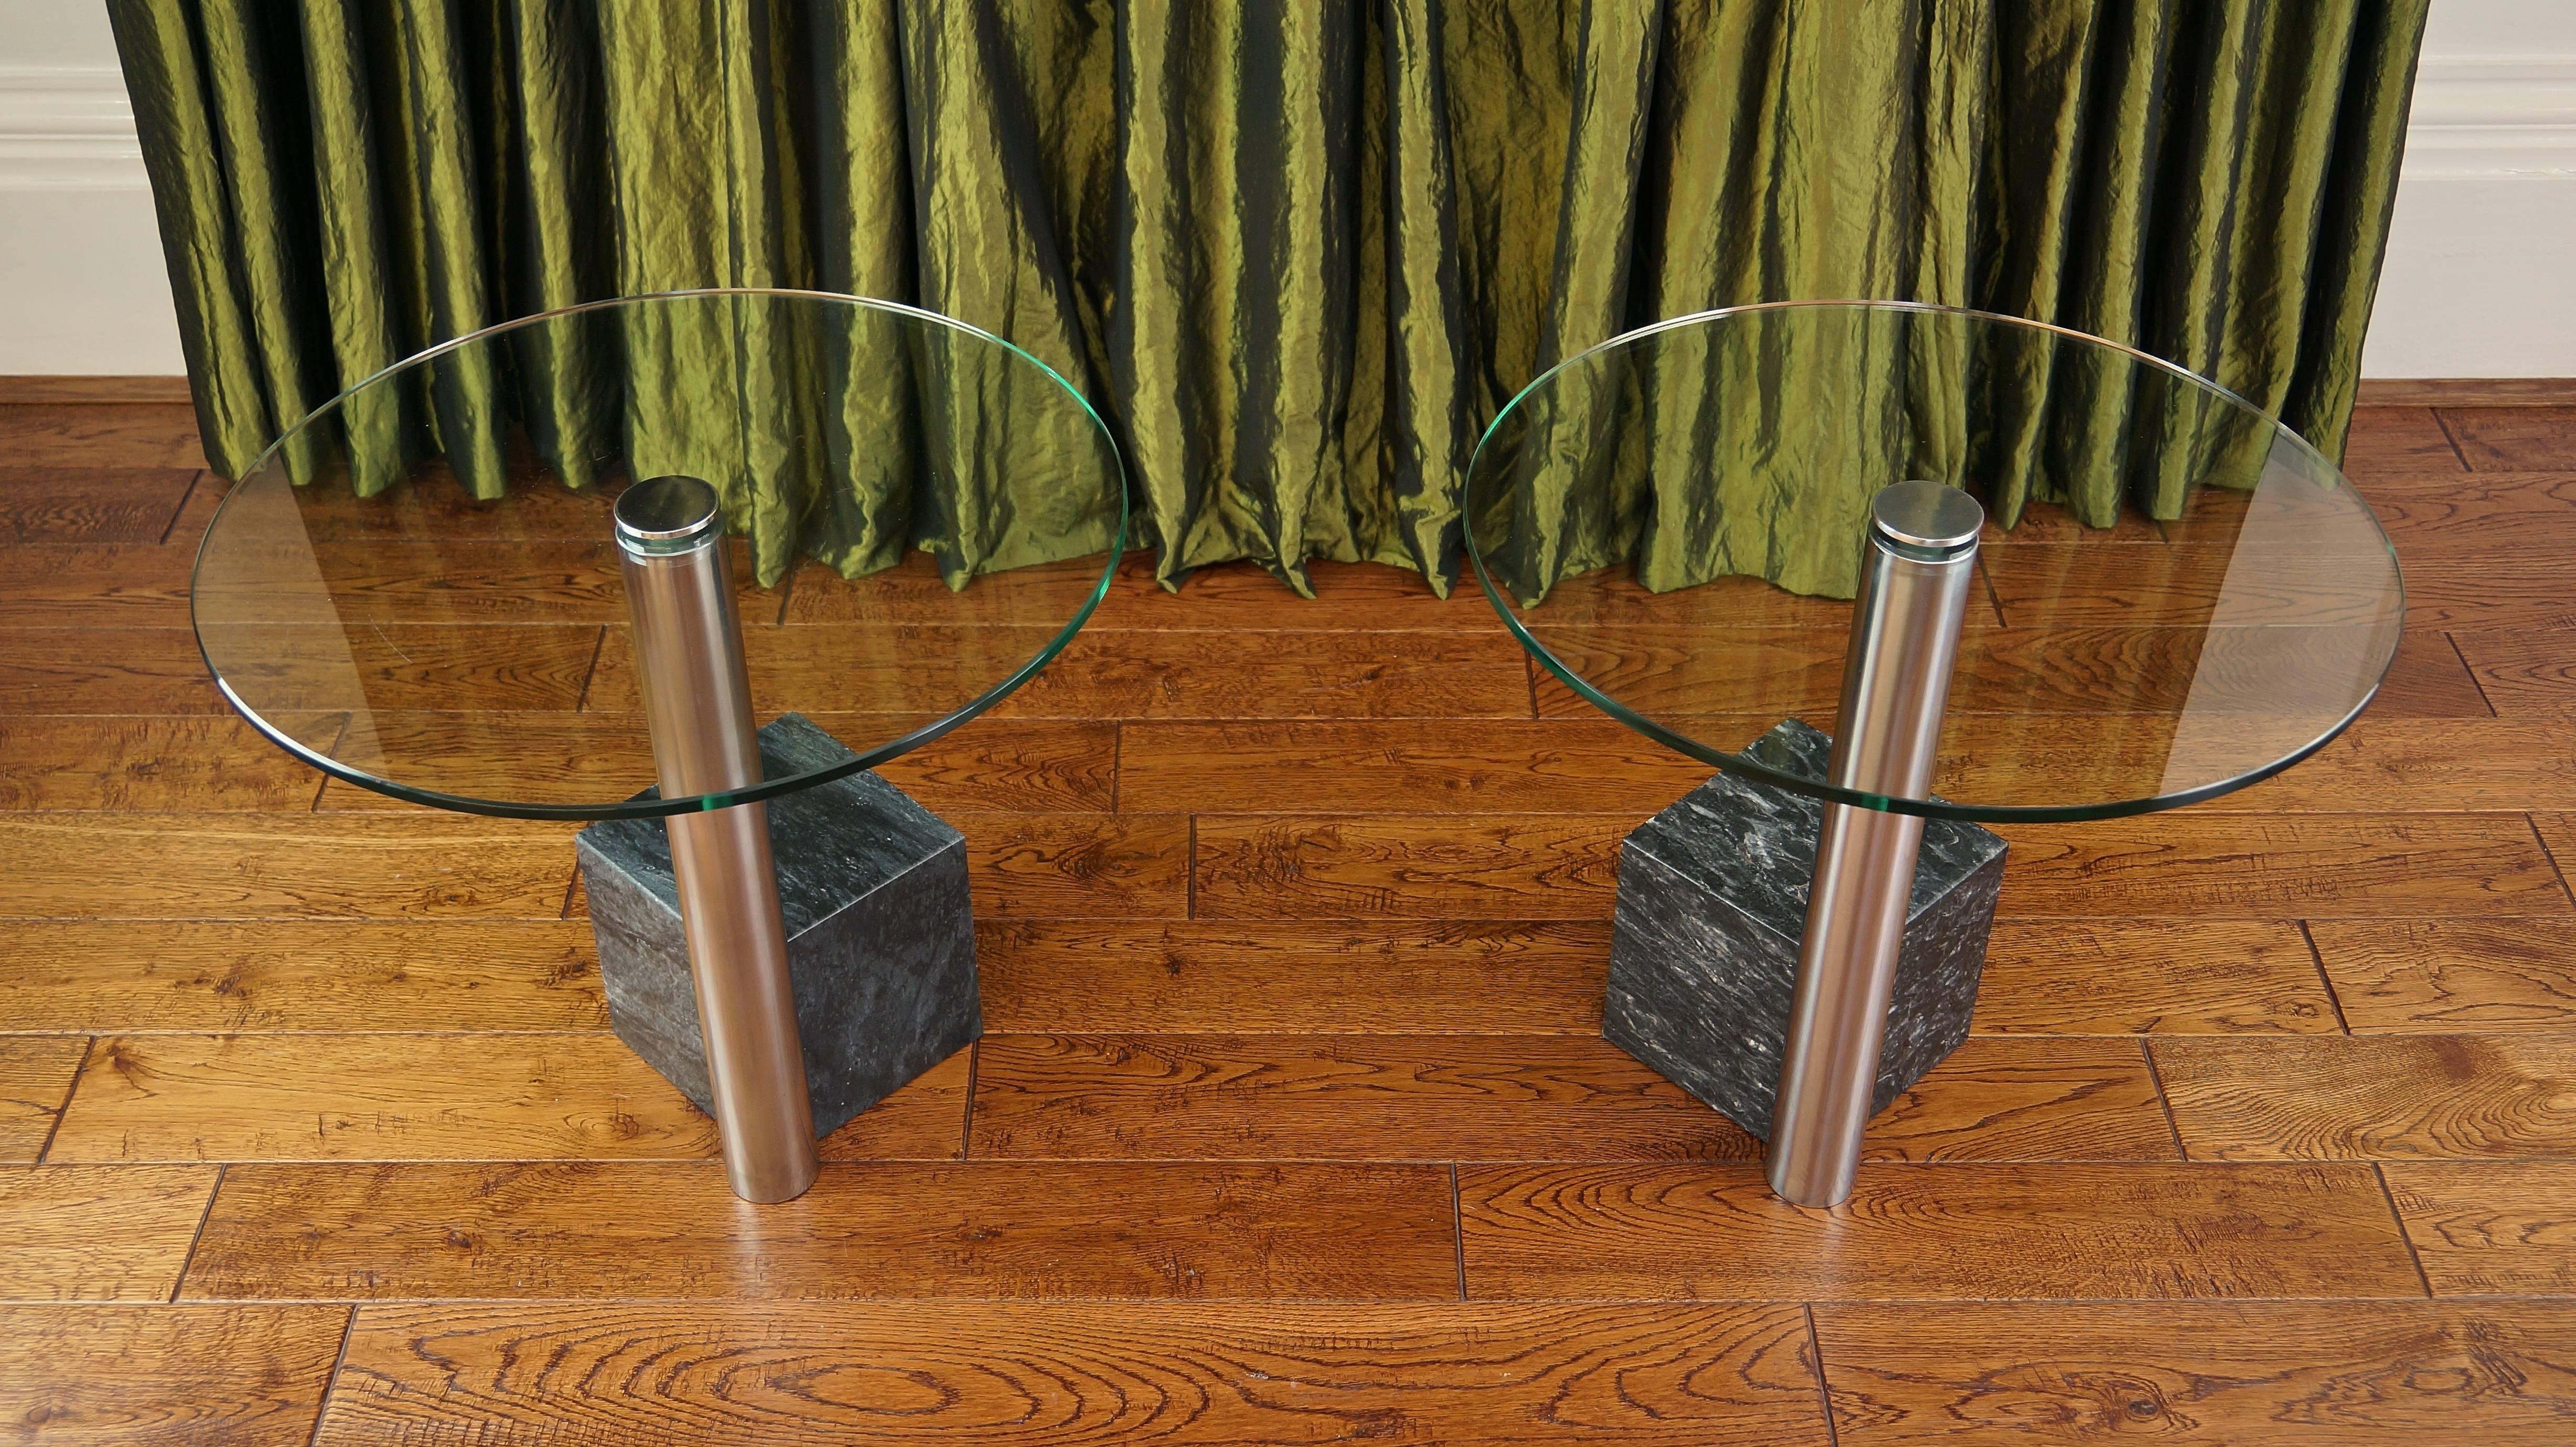 Late 20th Century Pair of Vintage Marble and Glass HK2 Side Tables by Hank Kwint, Metaform 1980s For Sale